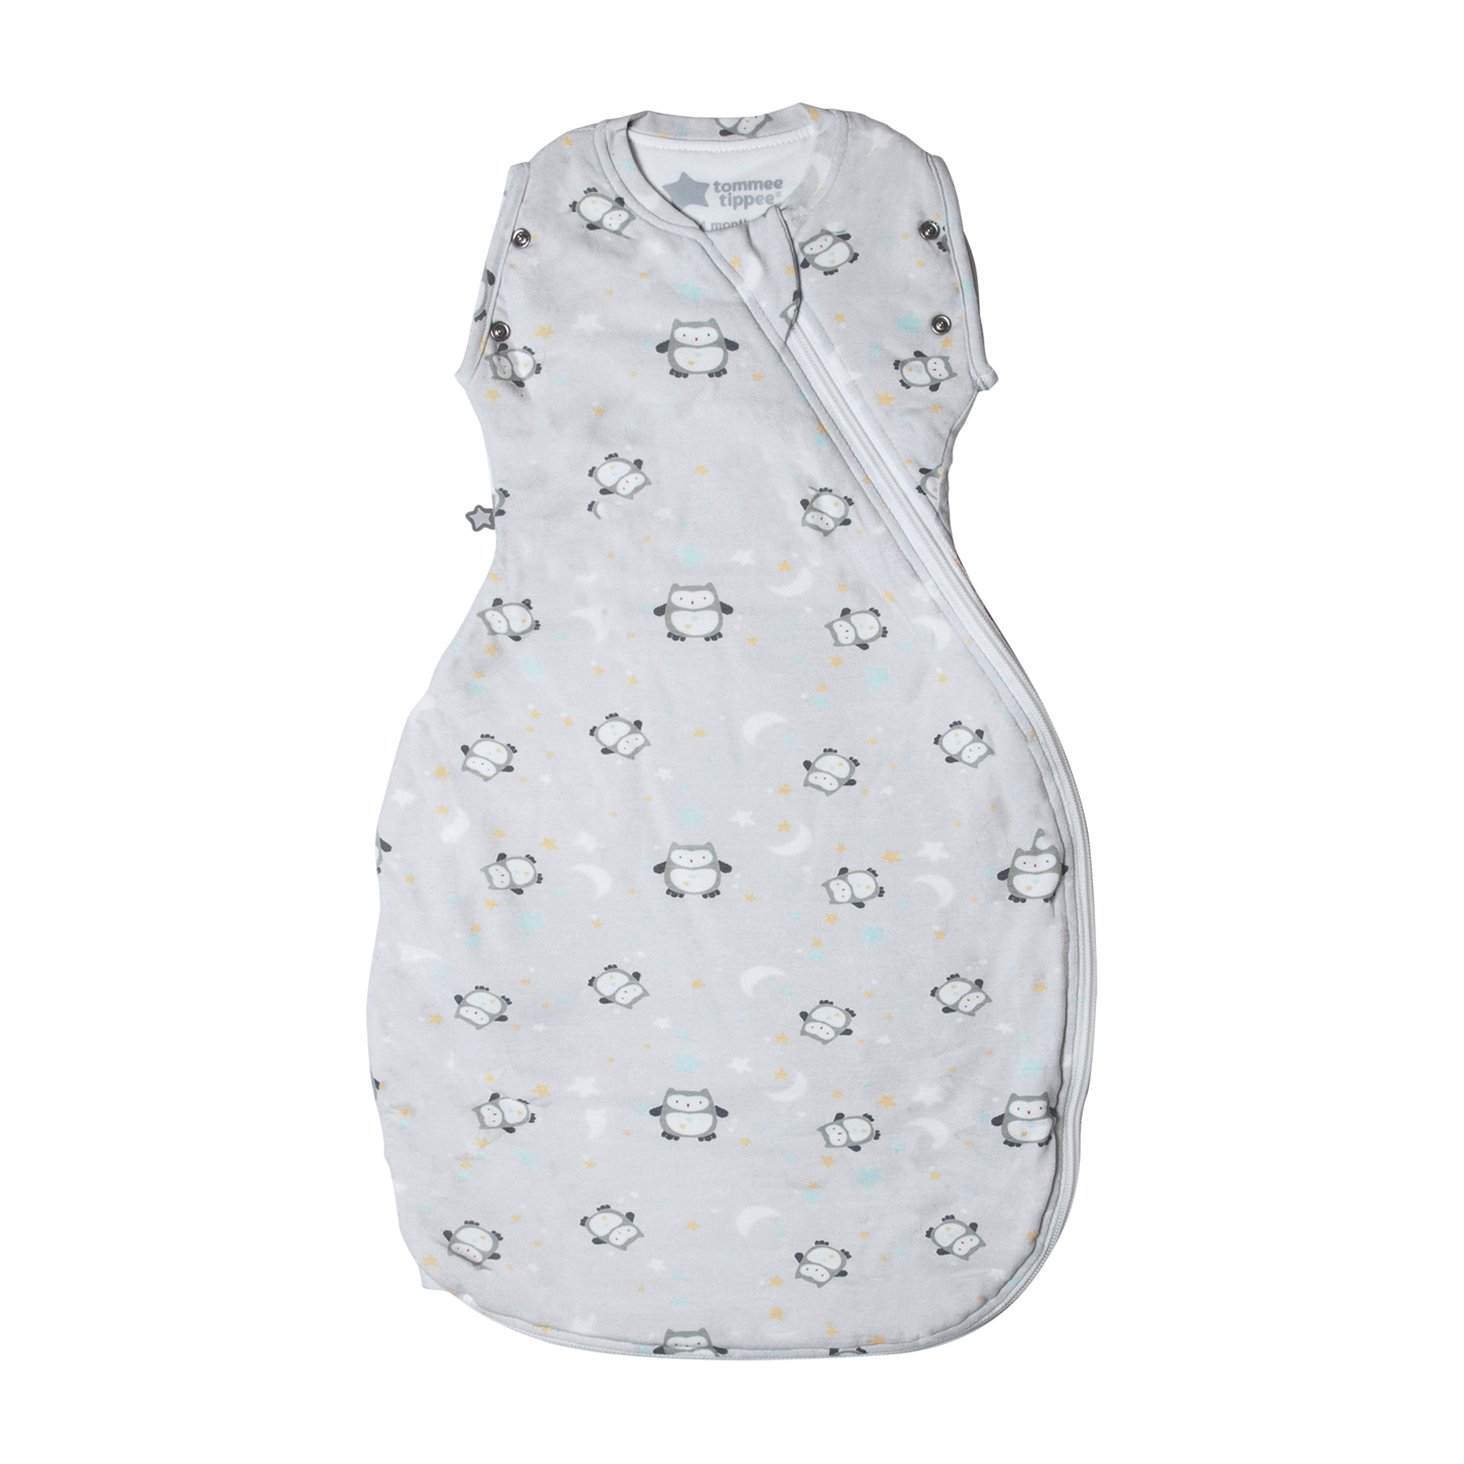 Tommee Tippee Newborn Snuggle, 3-9m, 2.5 Tog, Little Ollie Review